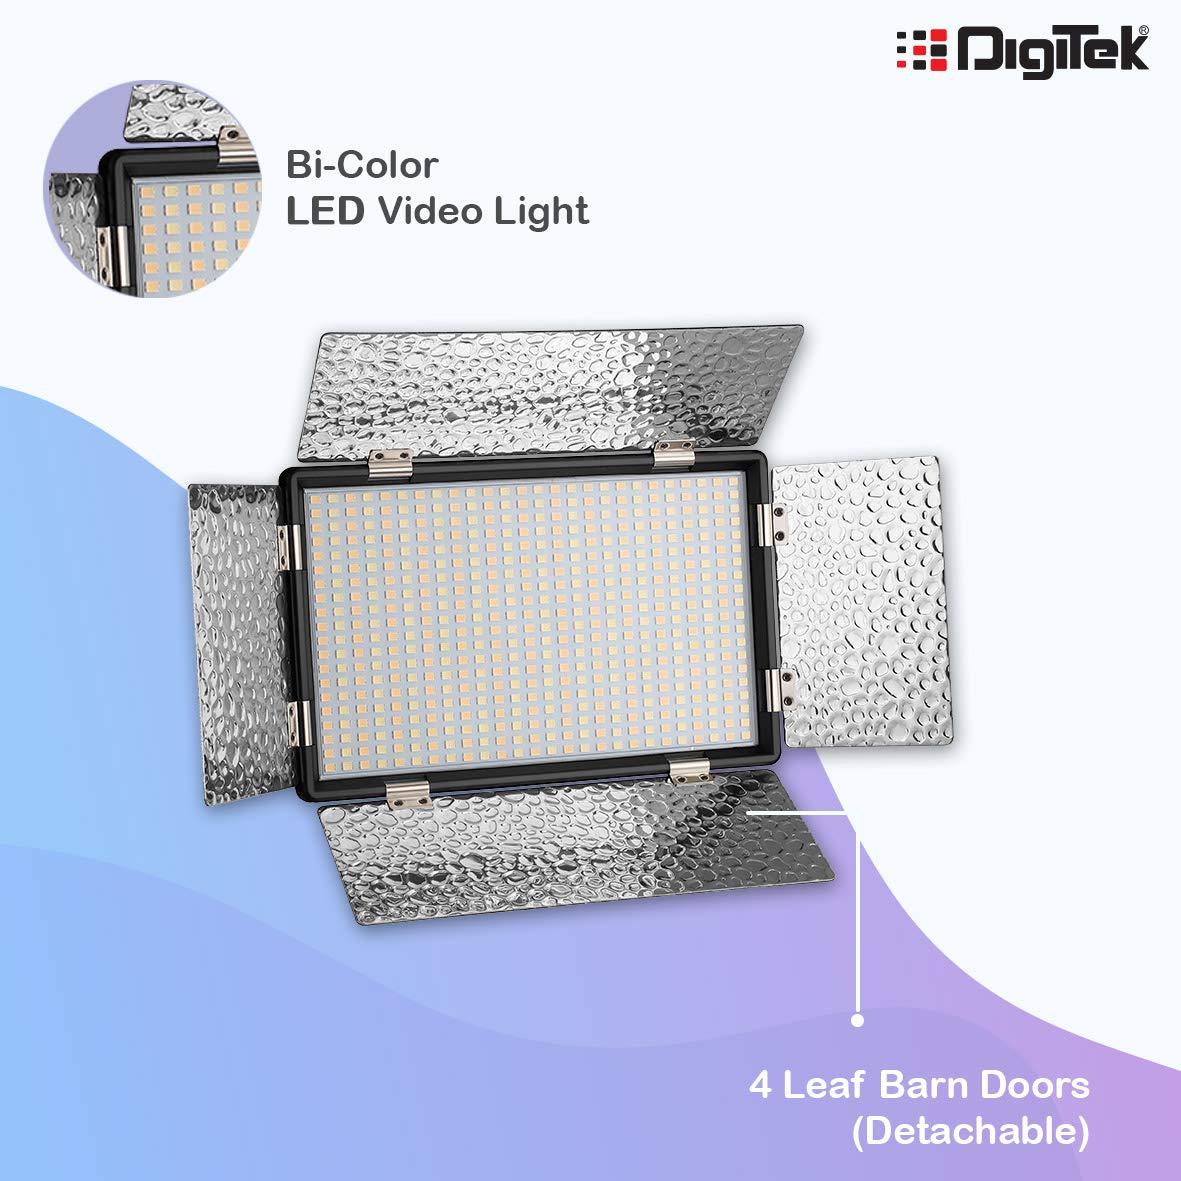 Digitek (LED D520B COMBO F-750MU) Bi-color LED D520B Video Light | Dimmable Light with 4 Detachable Barndoor | Compatible with Tripods, Monopods, Cameras, Table stand & Camcorder | For YouTube Video , Product Photography, Makeup shoot and more. - Digitek